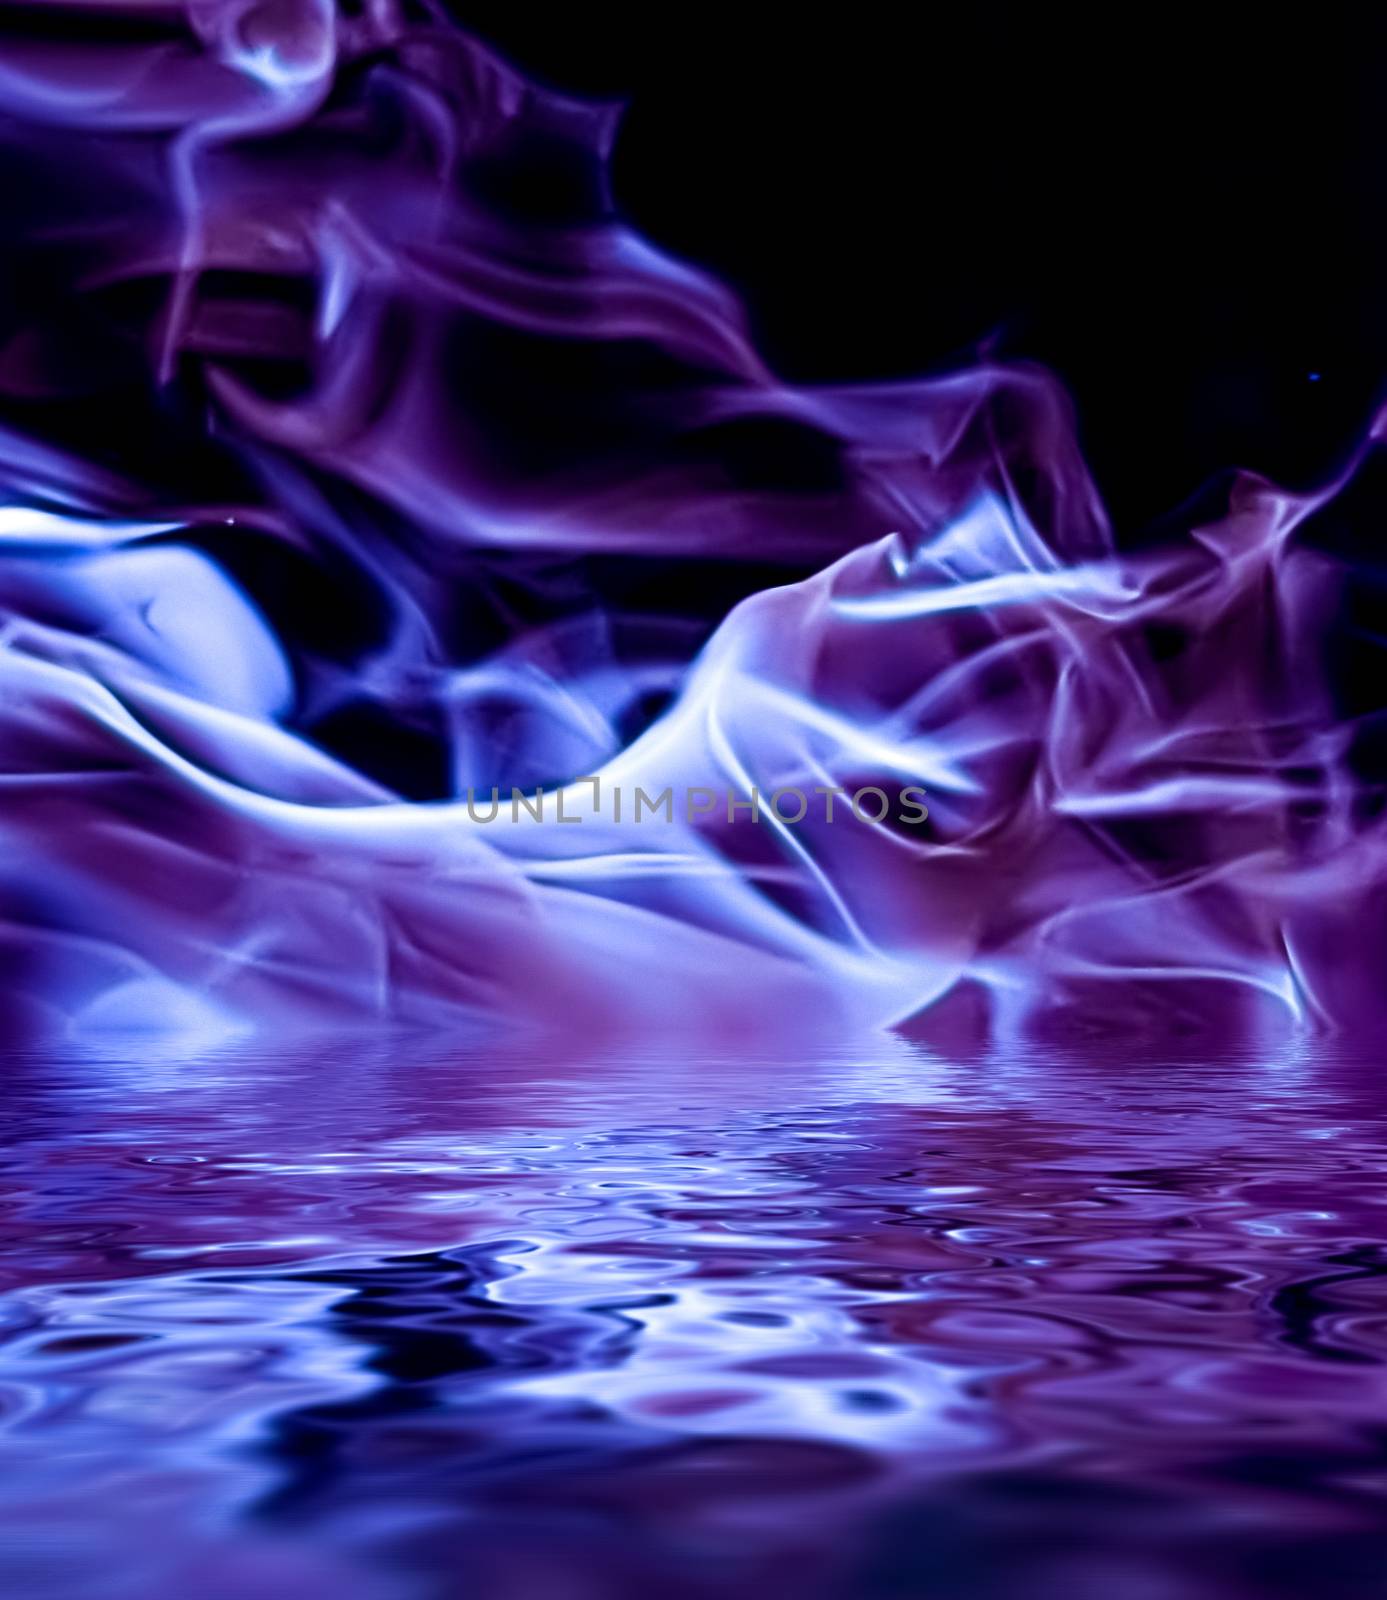 Abstract purple smoke in water as minimal background, magic back by Anneleven